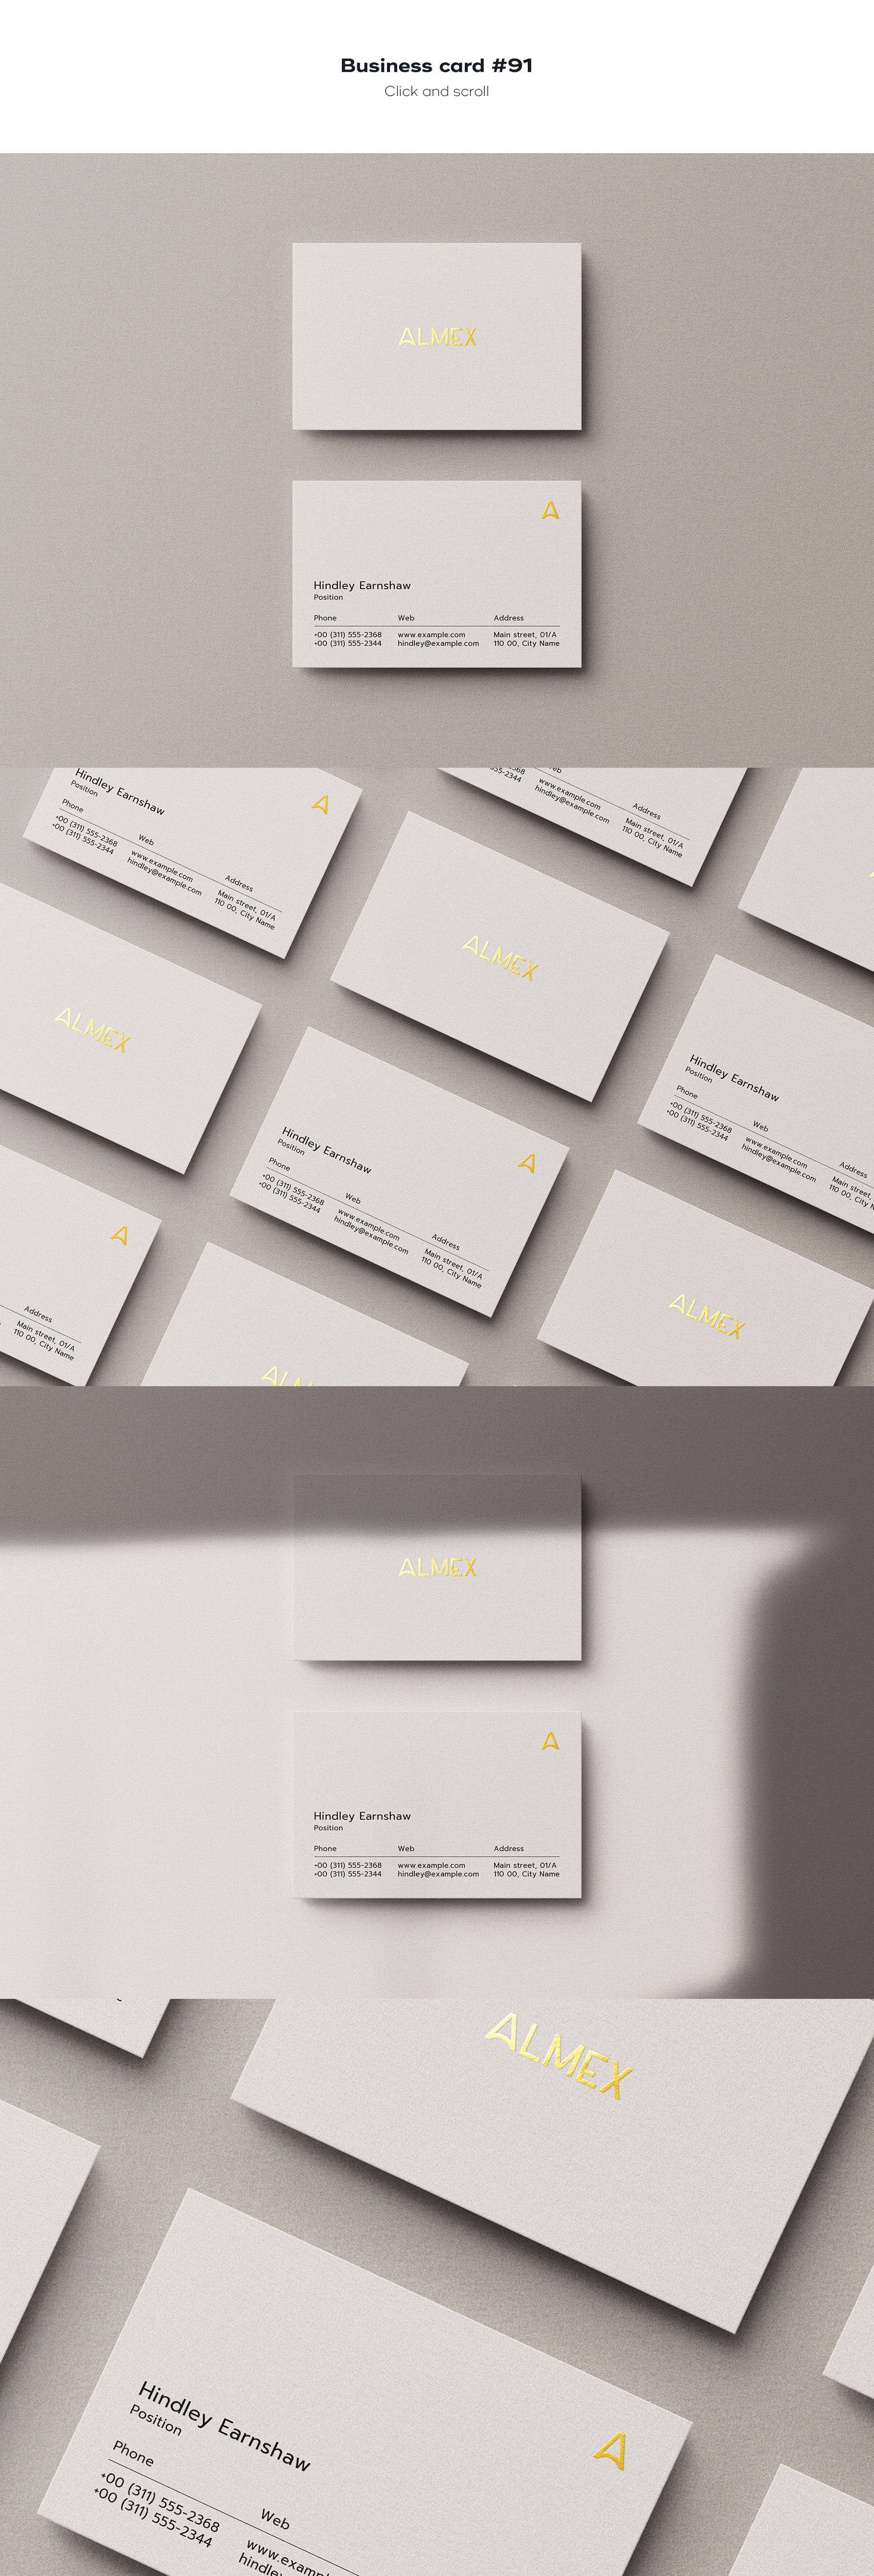 business card 91 29